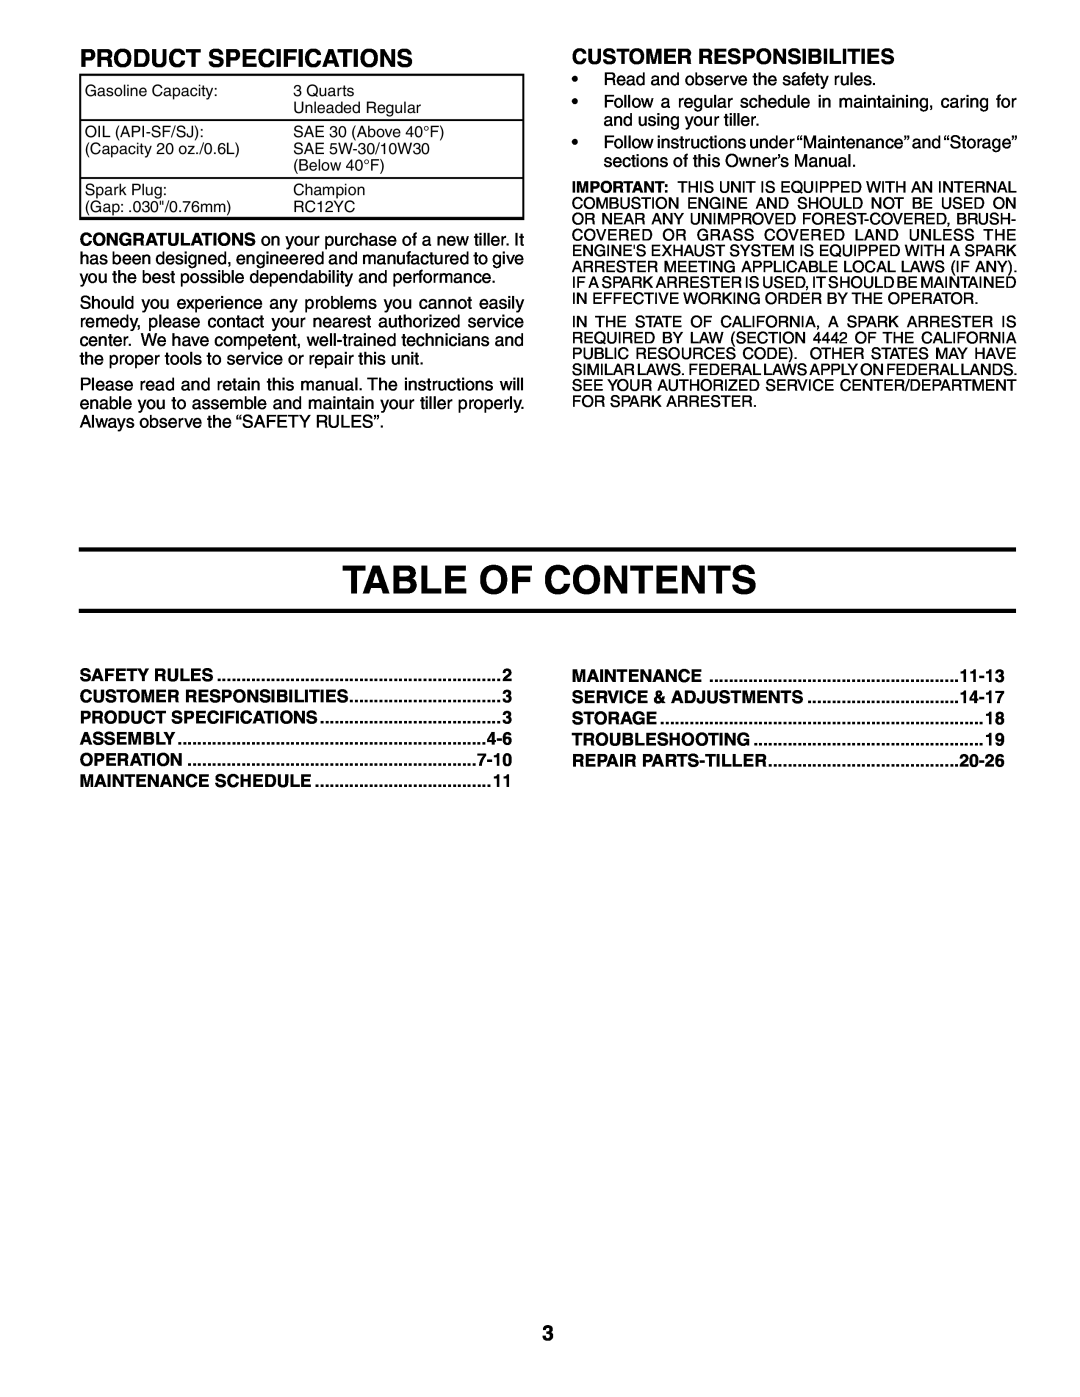 Husqvarna 650CRT Table Of Contents, Product Specifications, Customer Responsibilities, 7-10, 11-13, 14-17, 20-26 